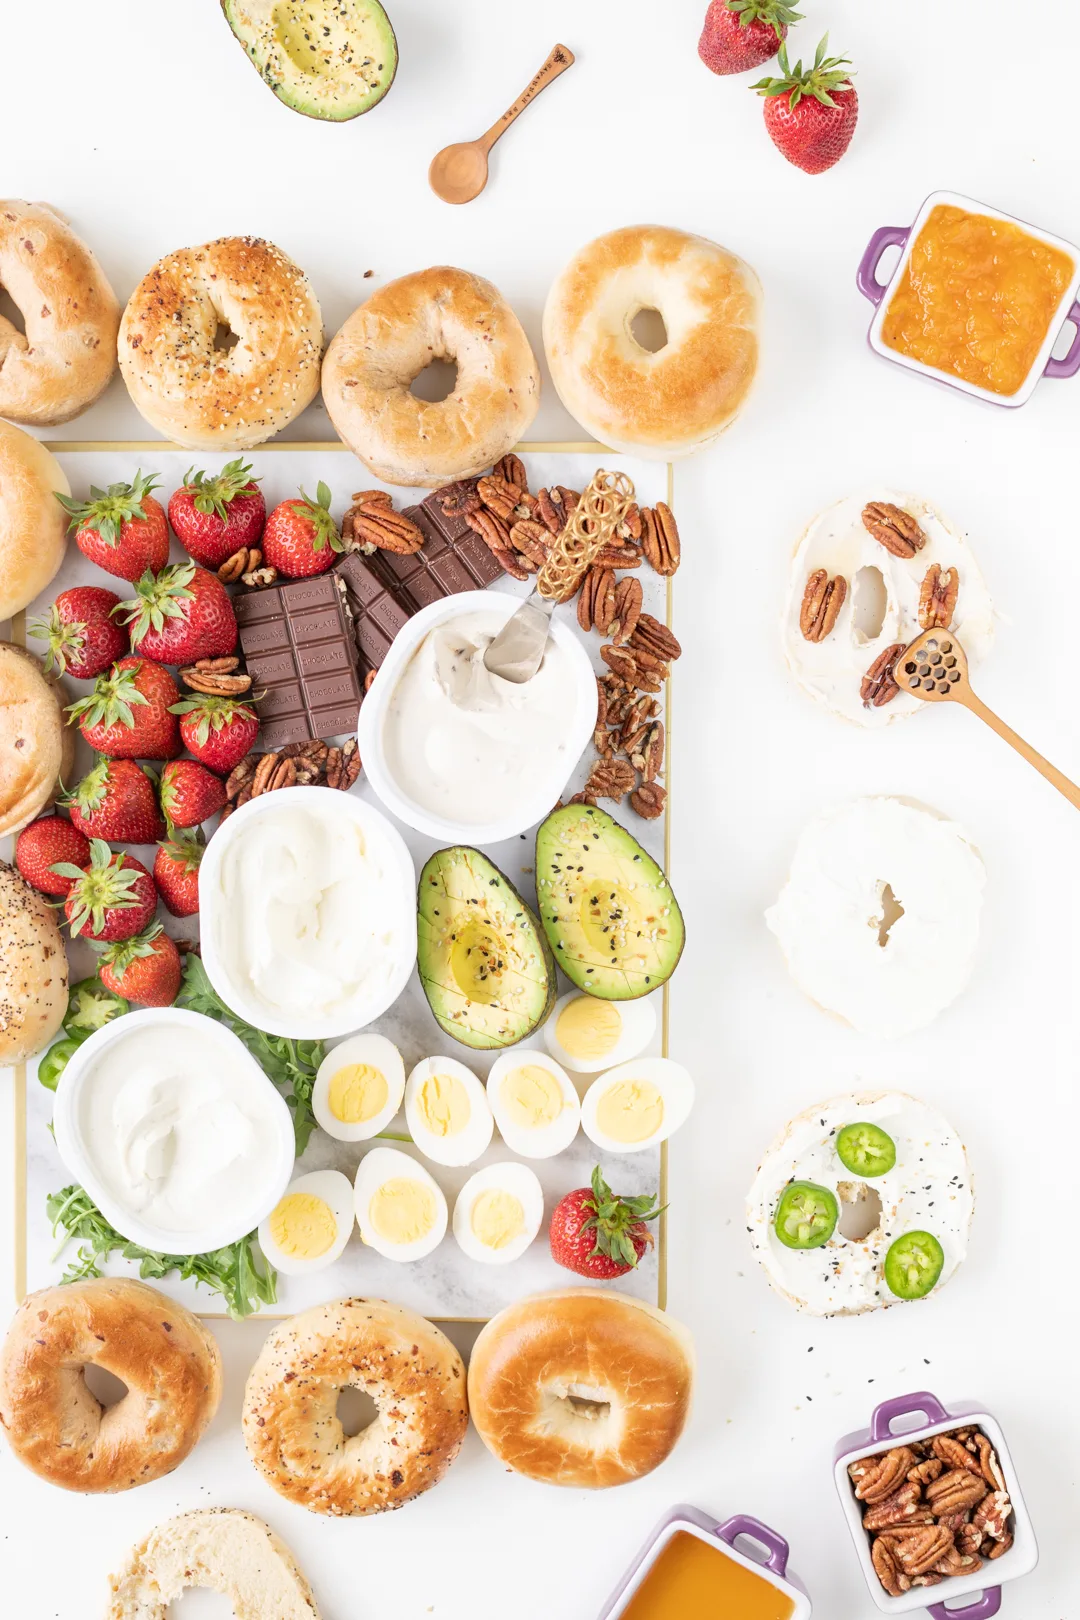 Brunch spread with bagels.